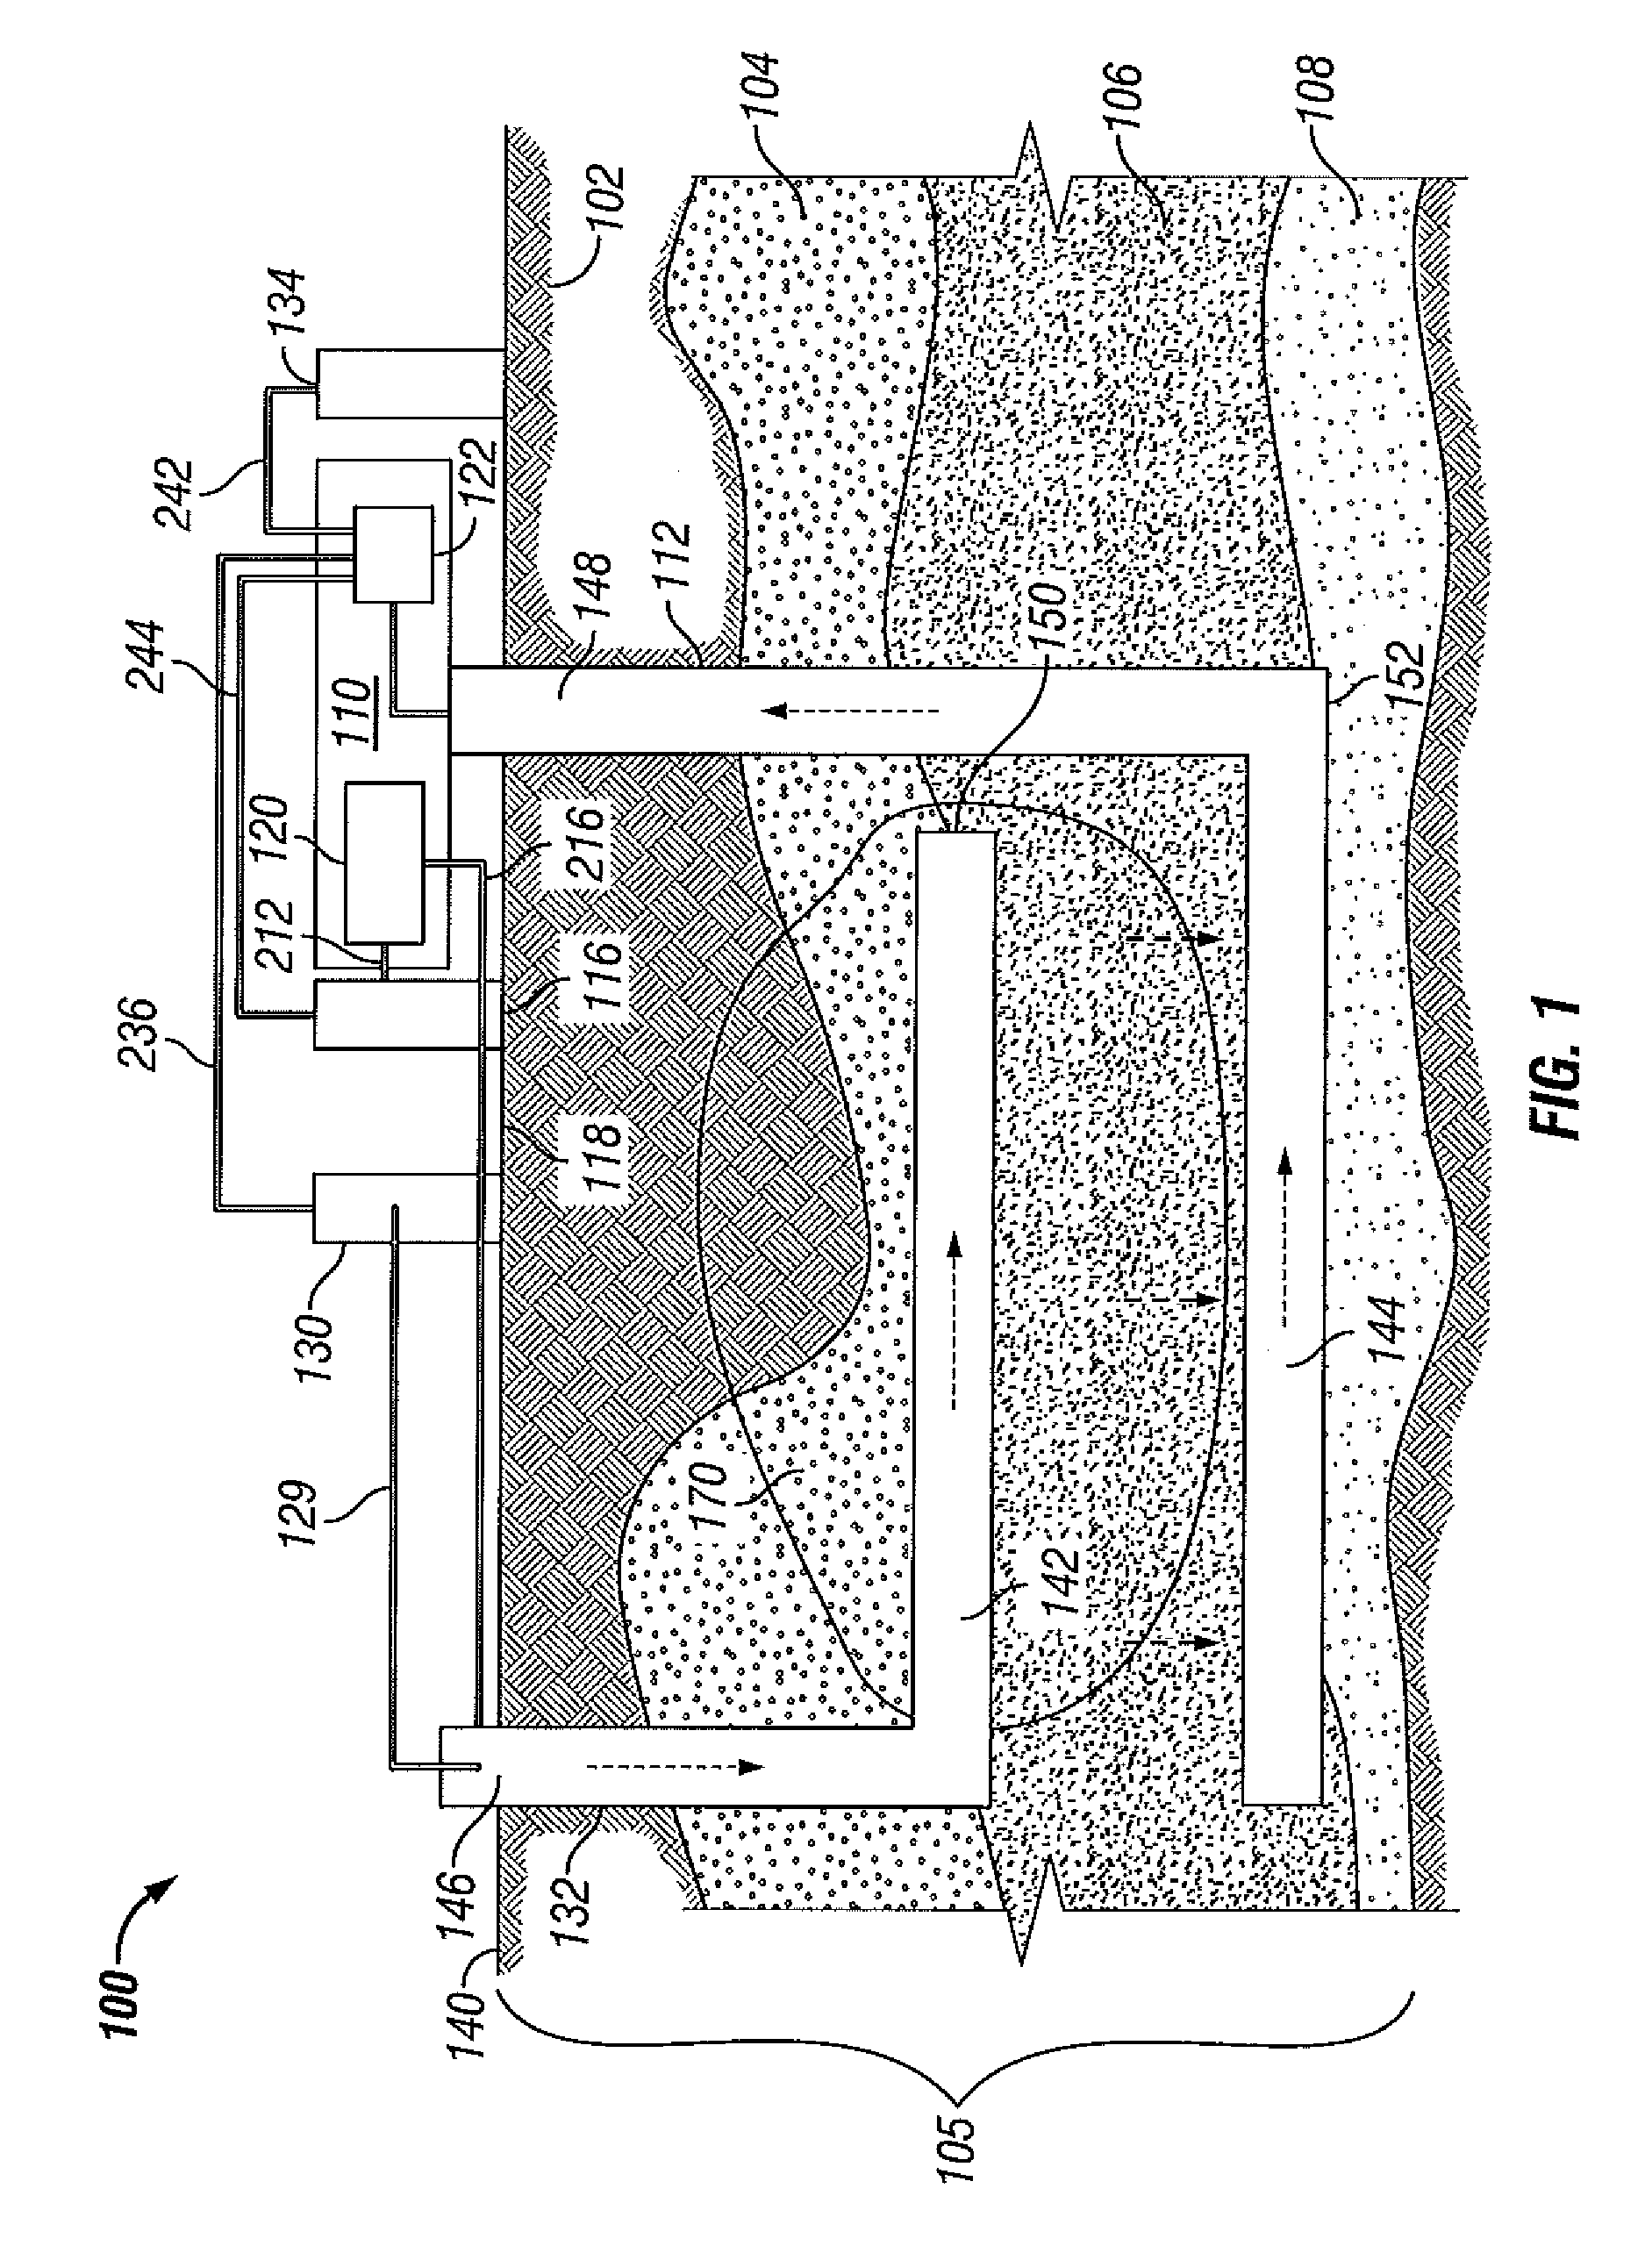 Oil recovery system and method